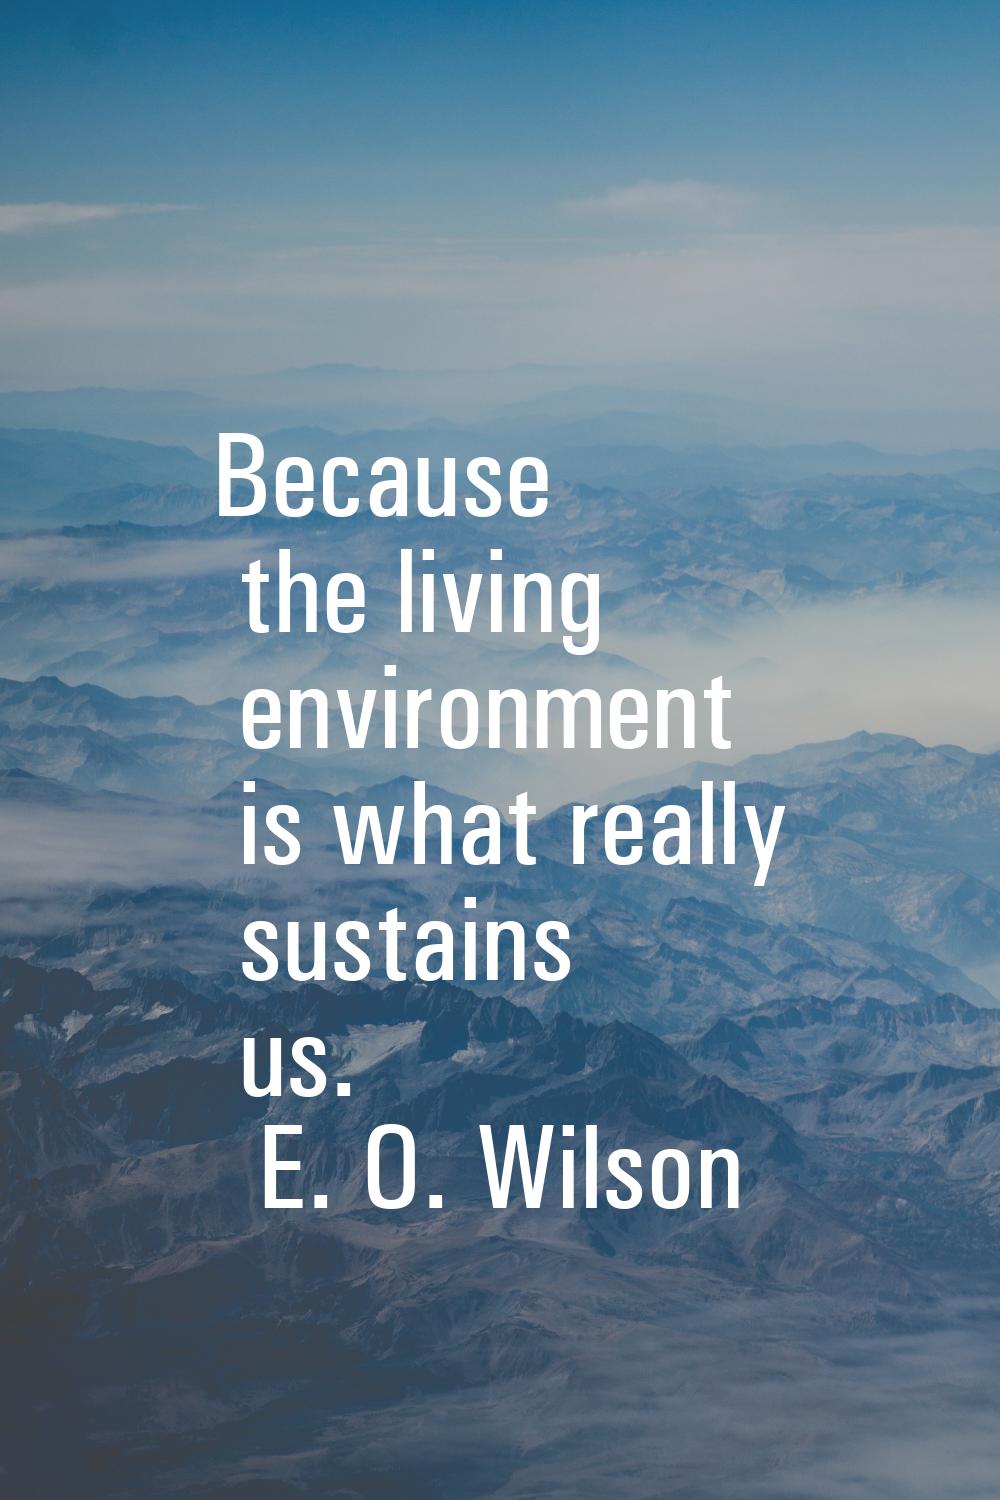 Because the living environment is what really sustains us.